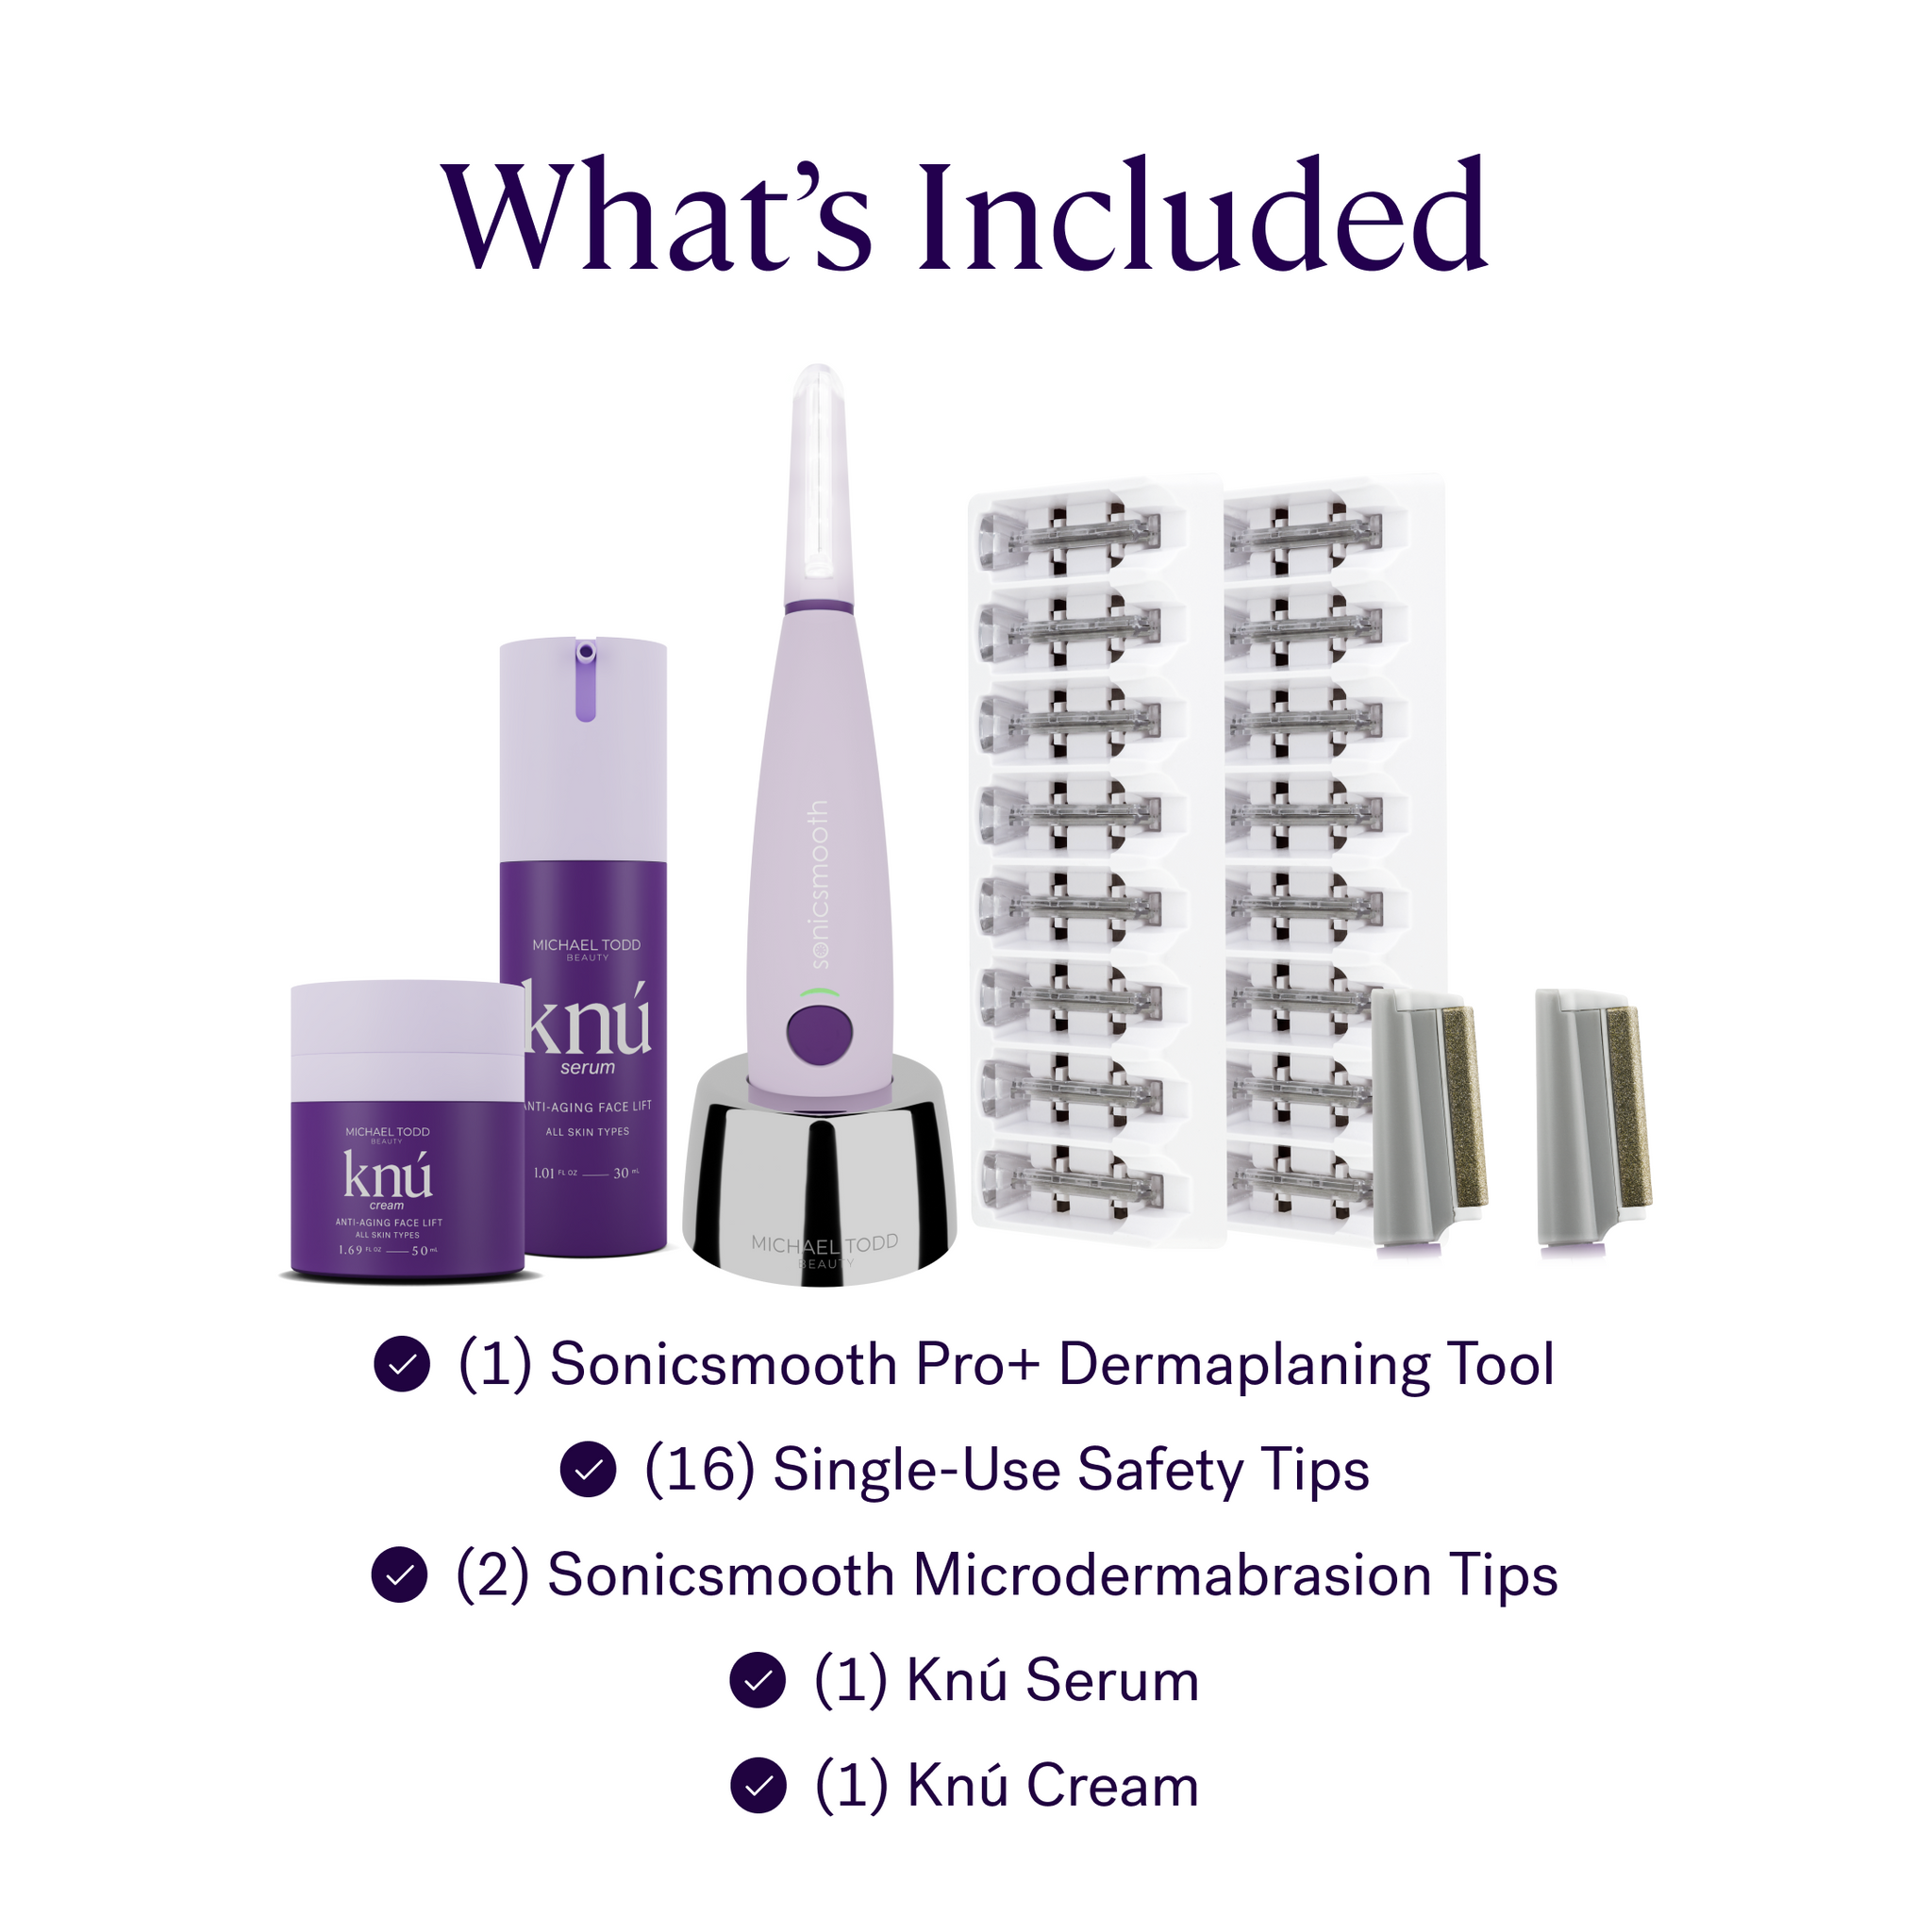 Promotional image displaying skincare products: one tube of cream, a 4 in 1 Dermaplaning & Post Treatment System with replaceable tips, and a serum bottle, all labeled with the brand name "Michael Todd Beauty.